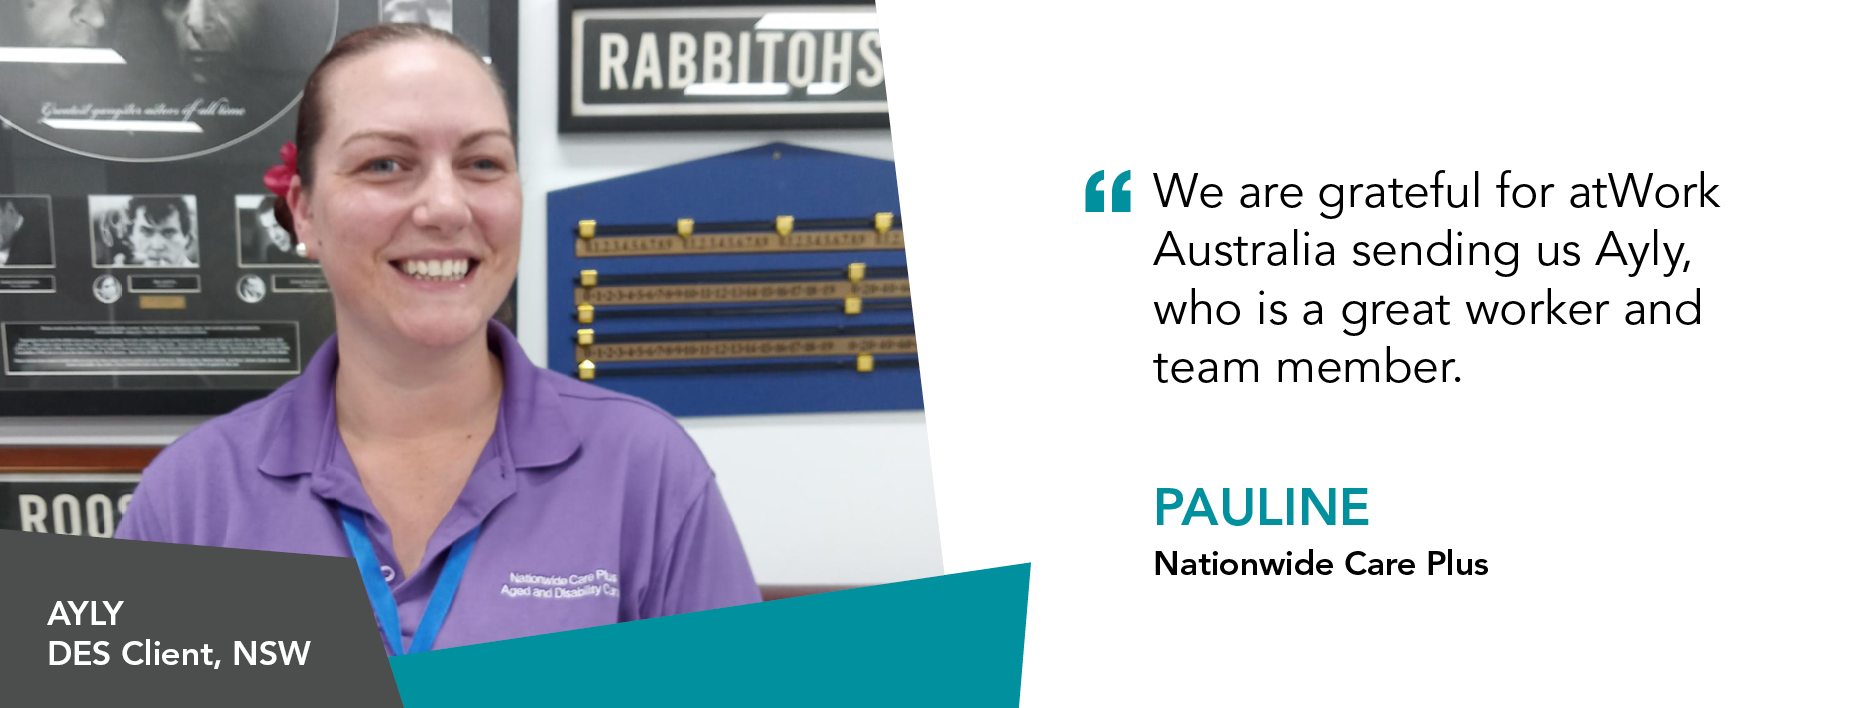 "We are grateful for atWork Australia sending us Ayly, who is a great worker and team member." Pauline Nationwide Care Plus